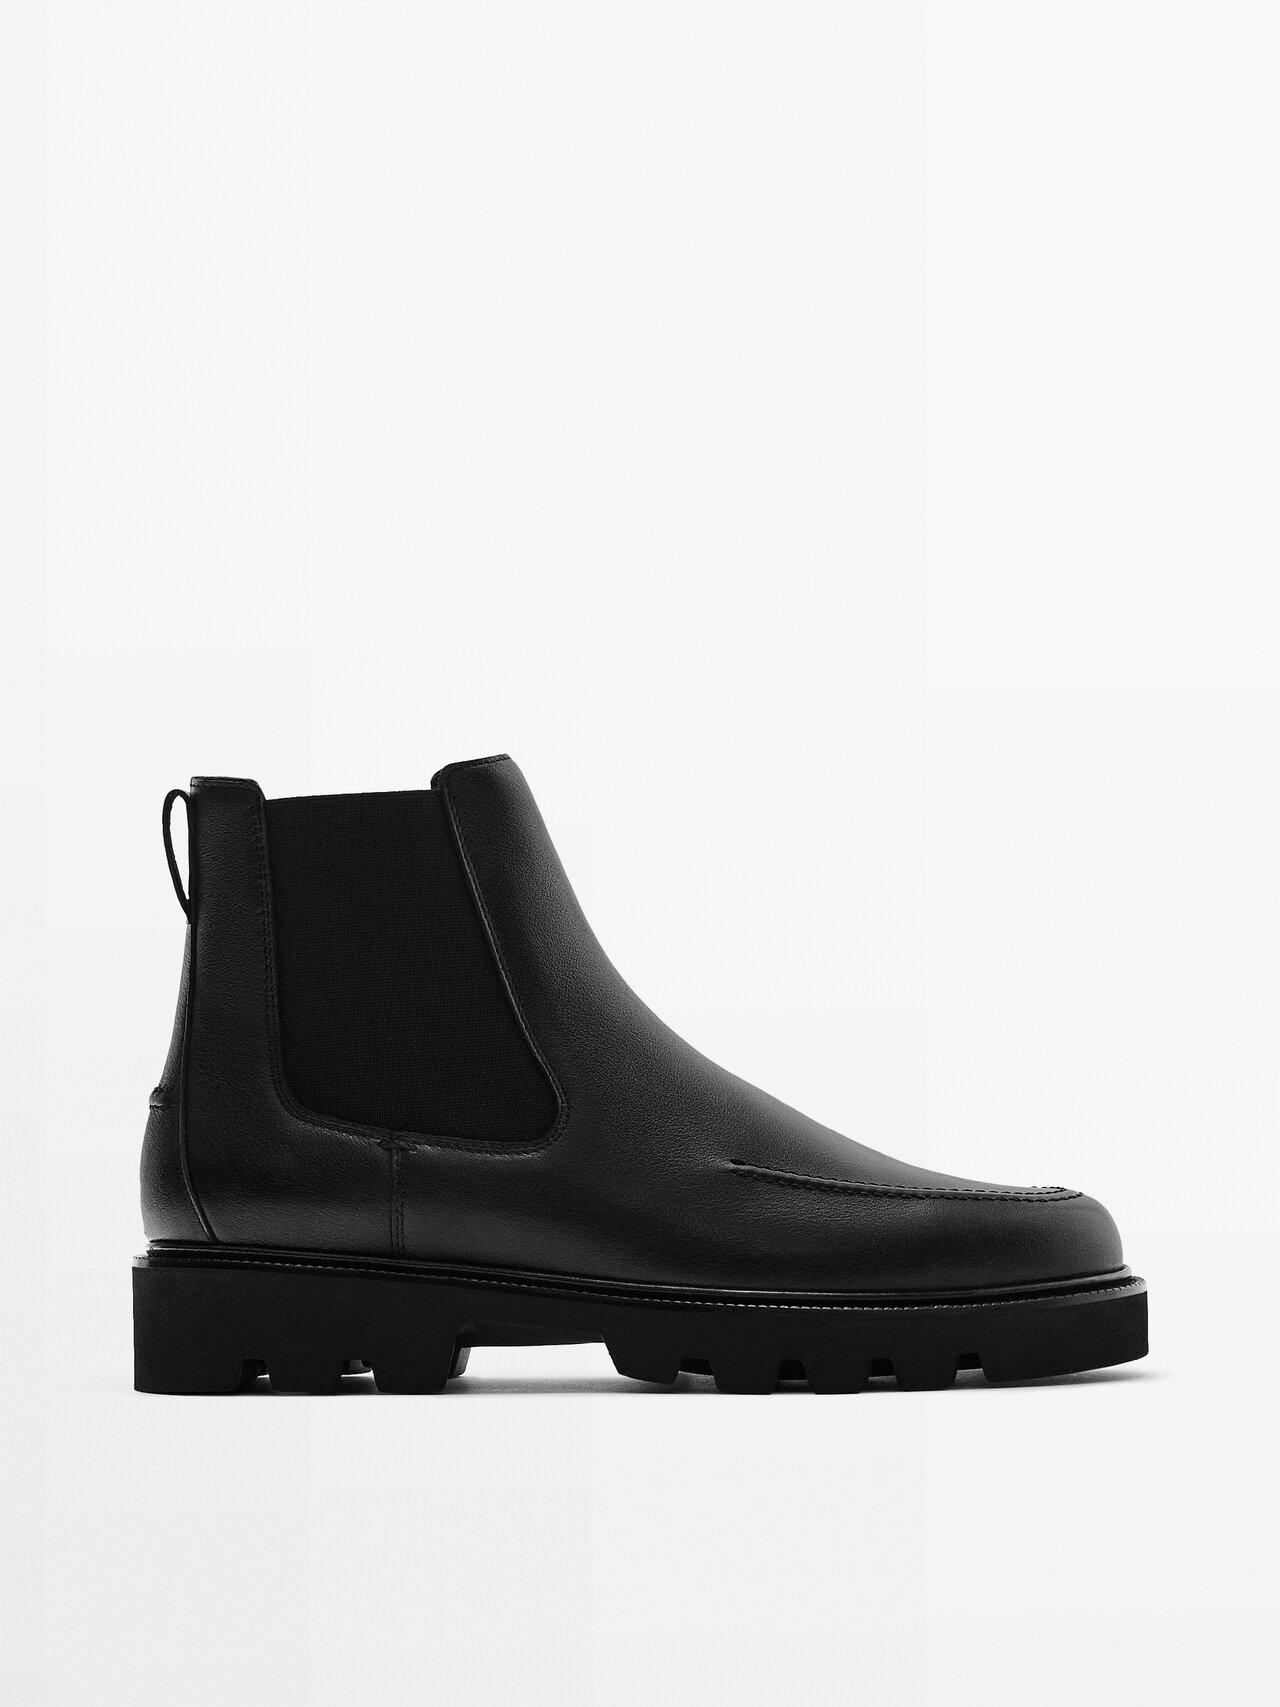 MASSIMO DUTTI Moc Toe Chelsea Boots in Black for Men | Lyst